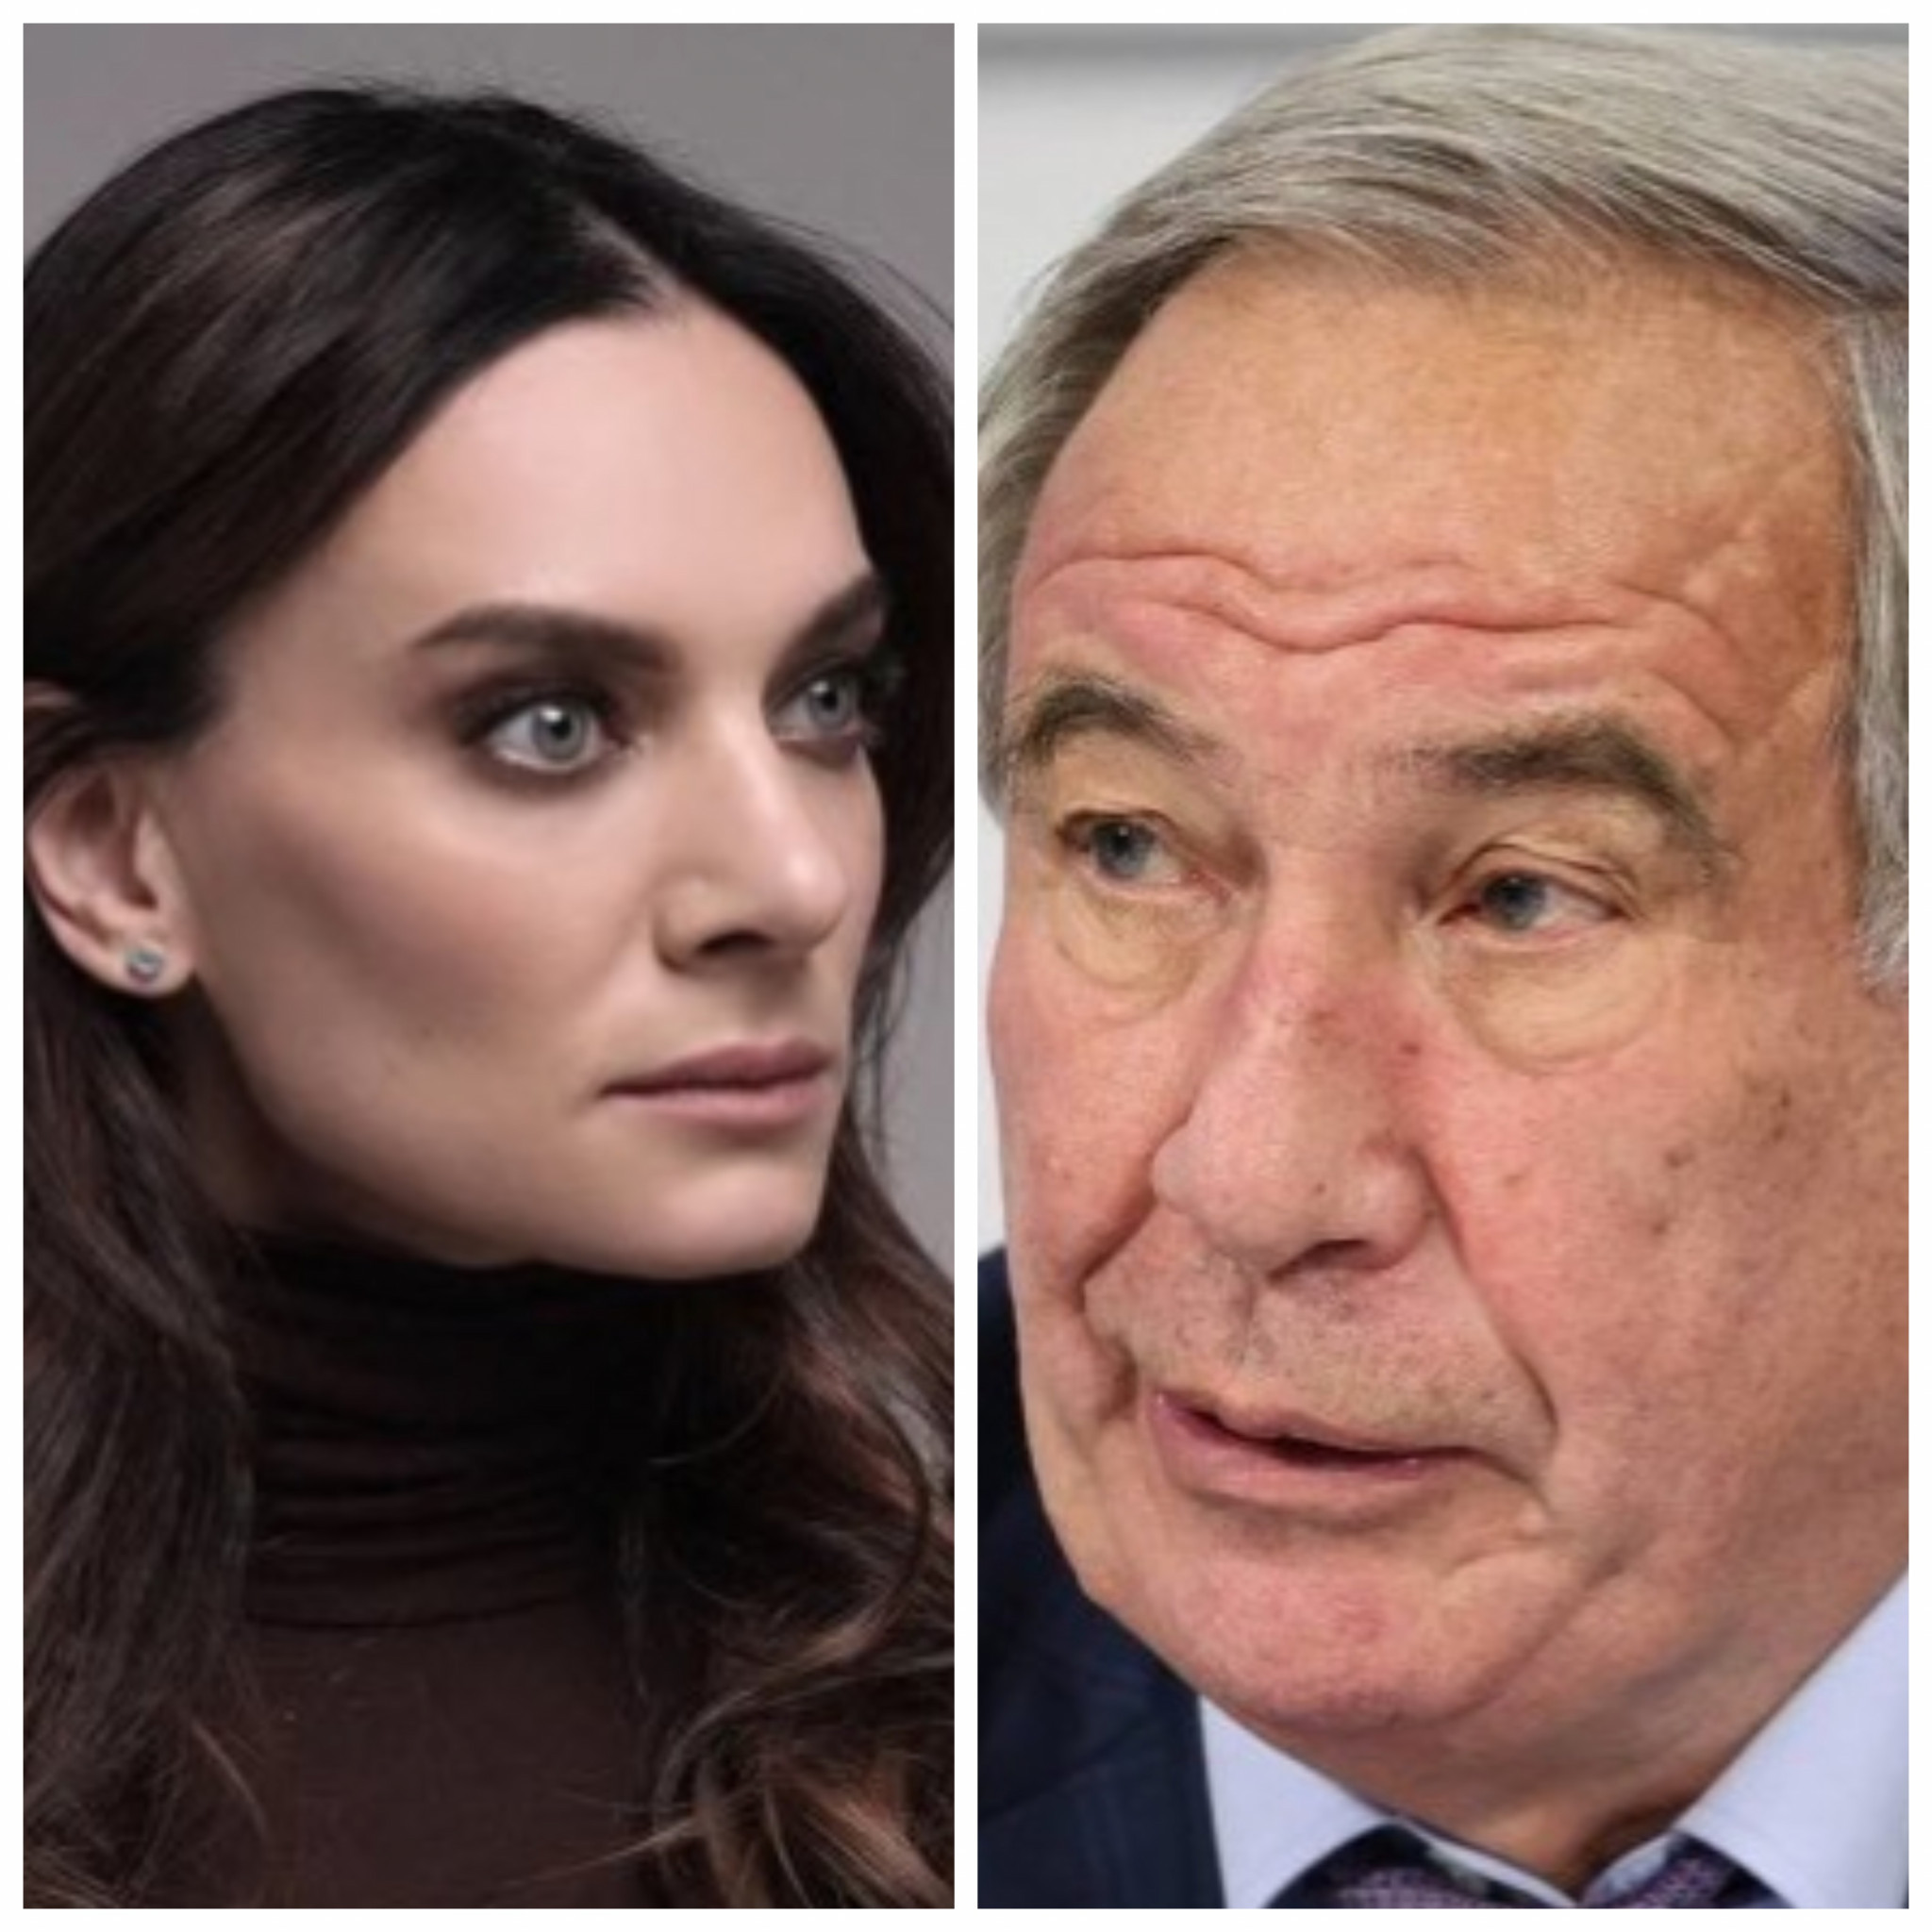 Russian IOC members Yelena Isinbayeva, left and Shamil Tarpischev, right, were among the absentees from the IOC Session in Mumbai ©Yelena Isinbayeva and Getty Images